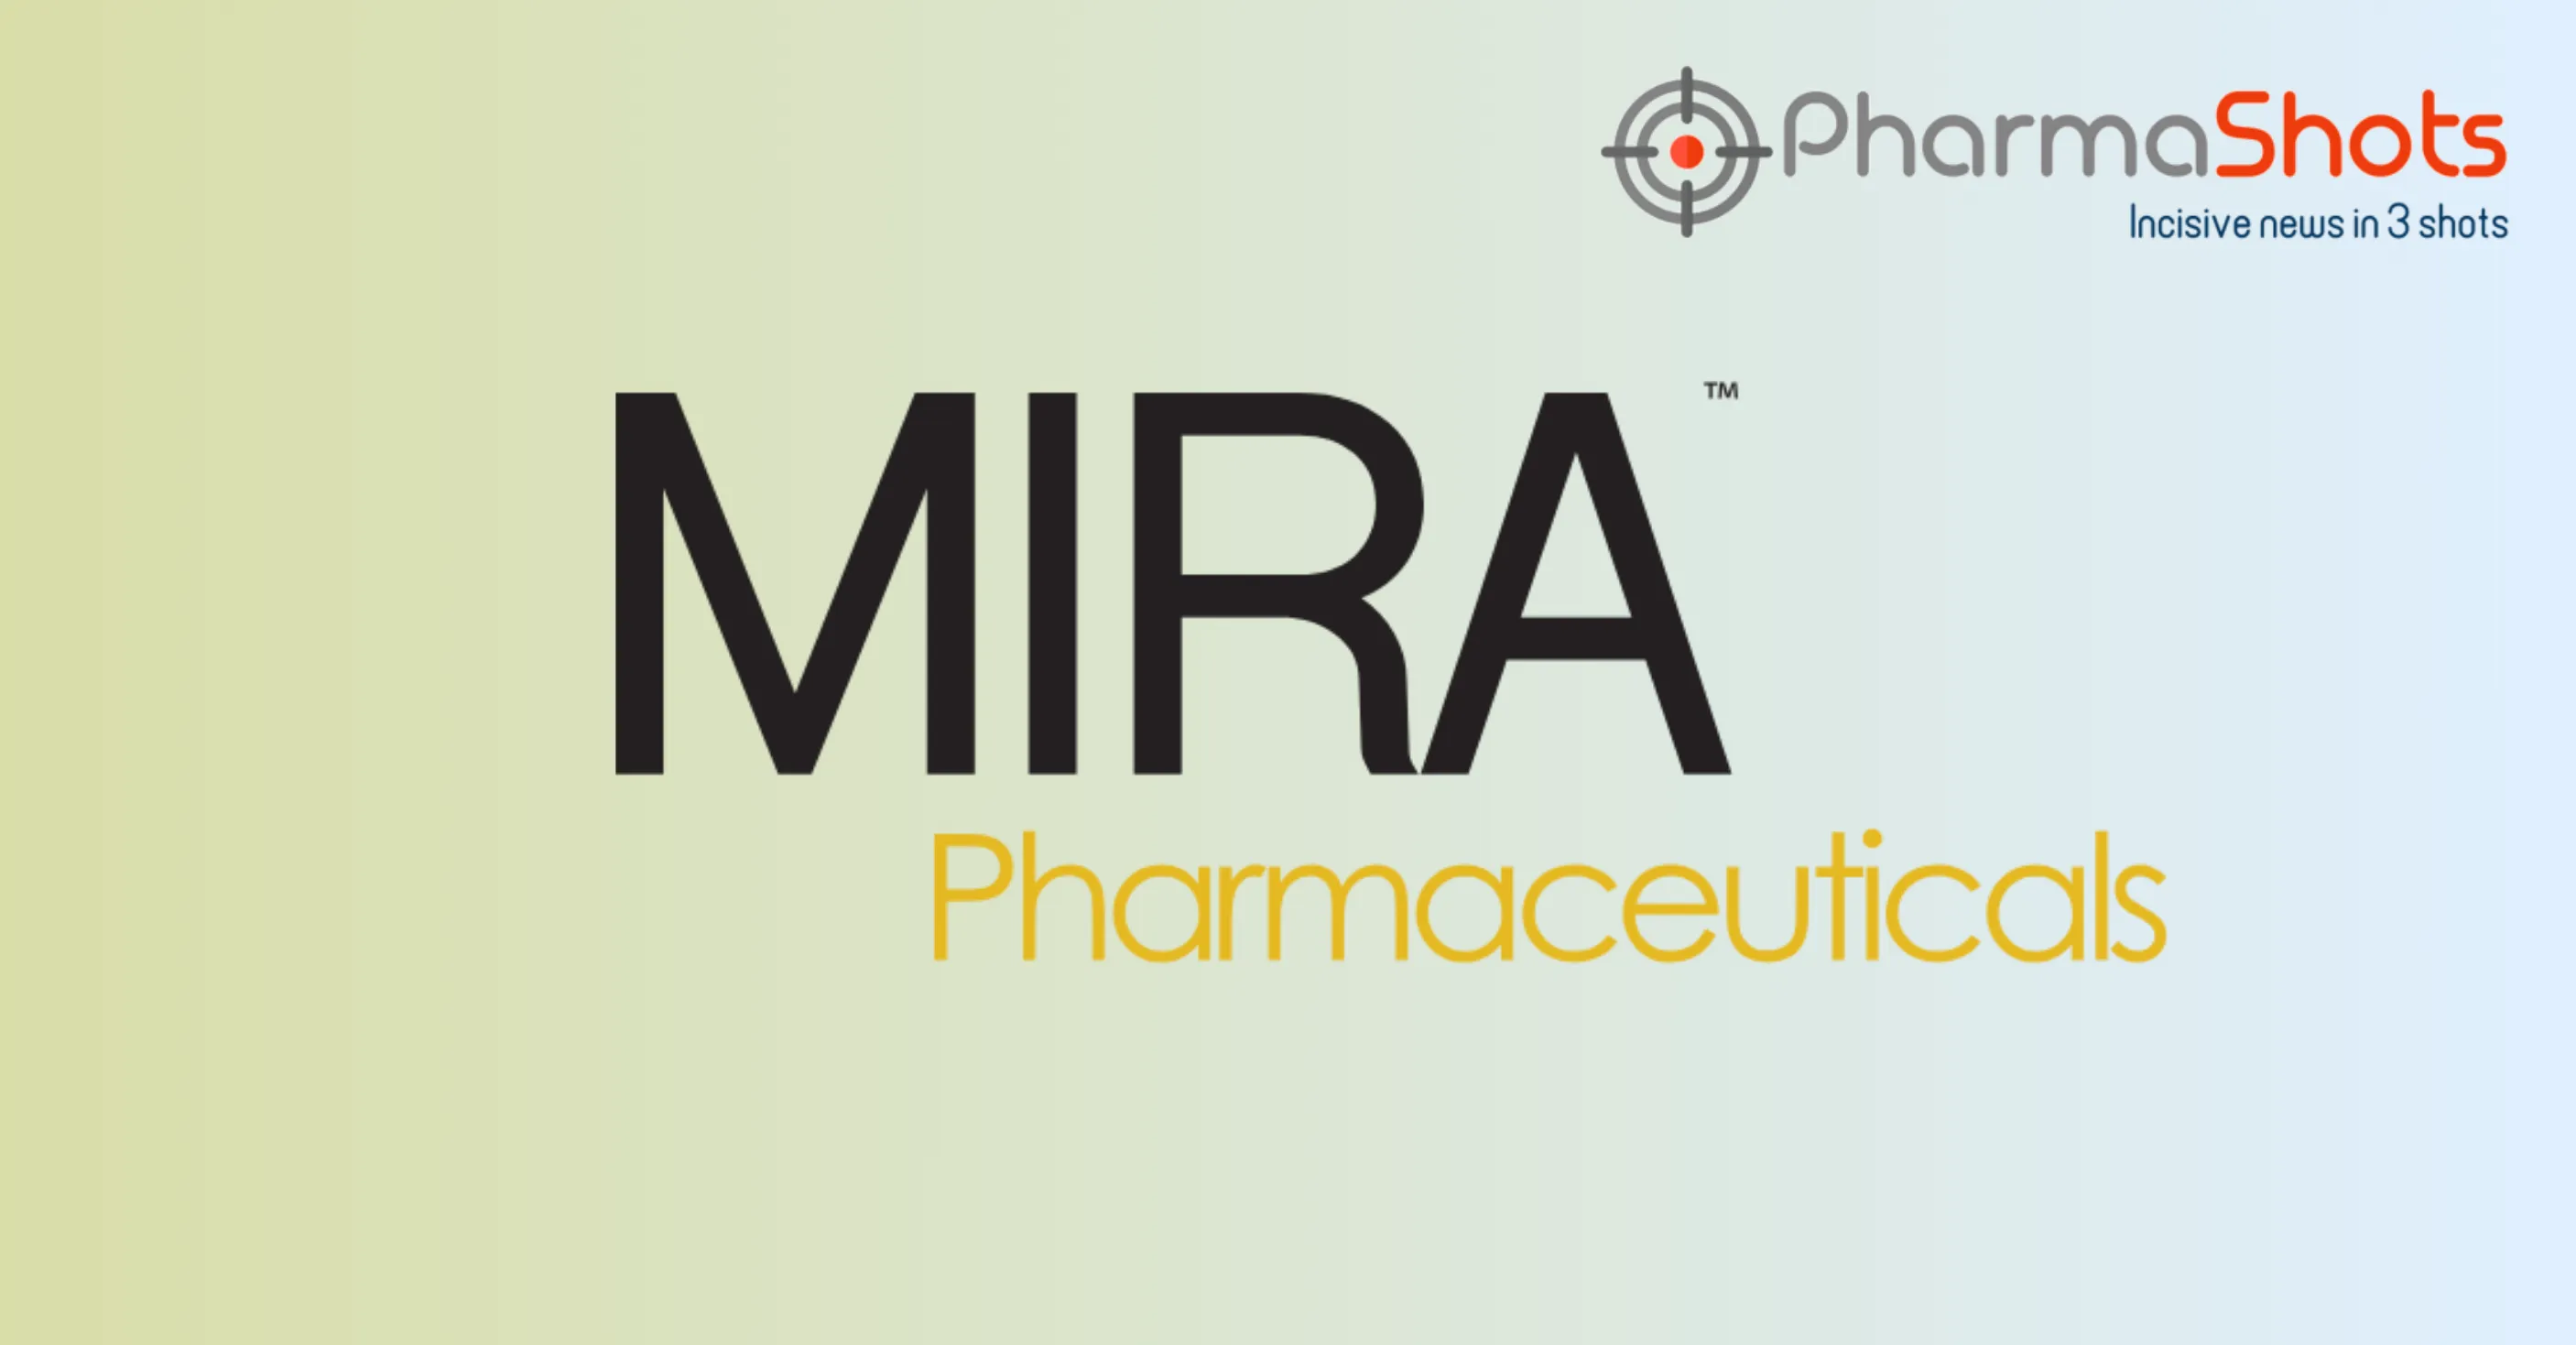 MIRA Pharmaceuticals & MIRALOGX Entered into an Exclusive Licensing Agreement for Ketamir-2